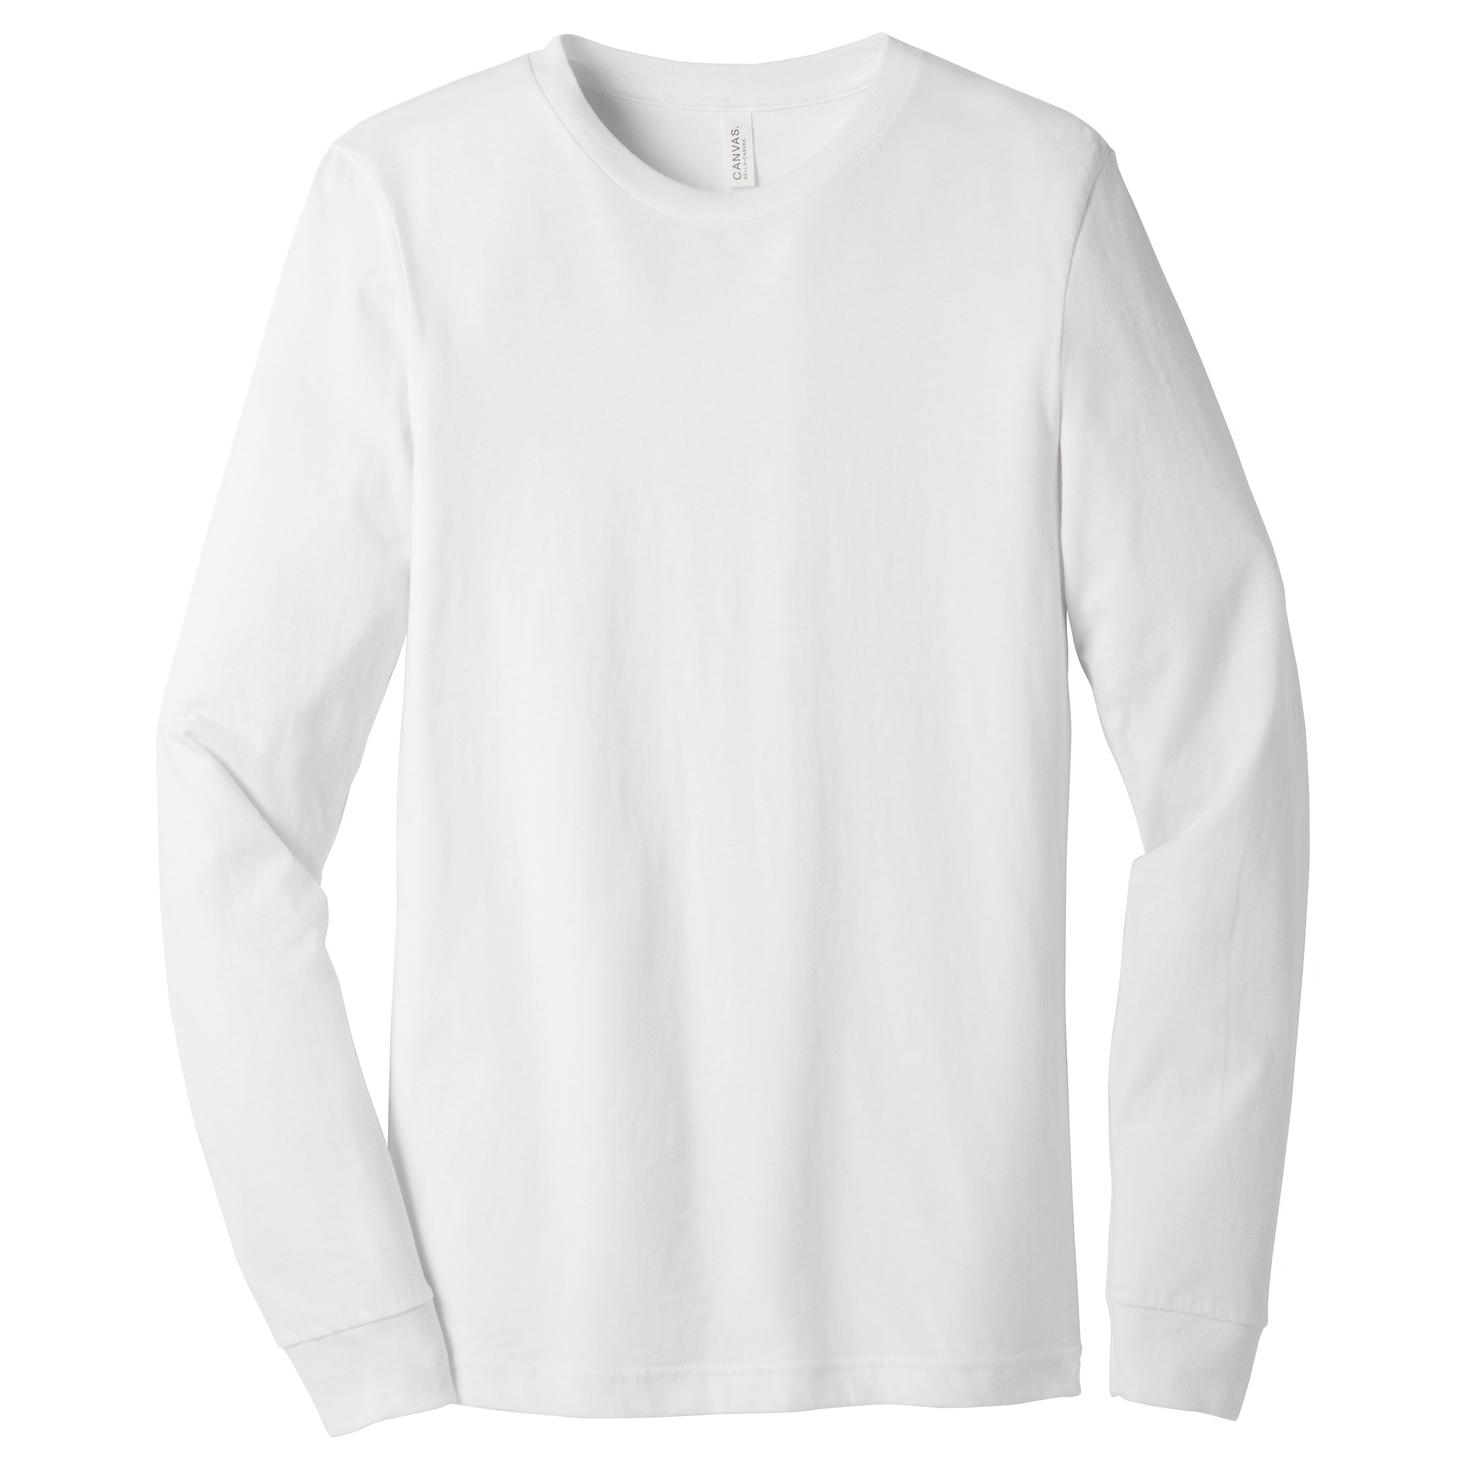 Bella + Canvas BC3501 Unisex Jersey Long Sleeve Tee - White | Full Source